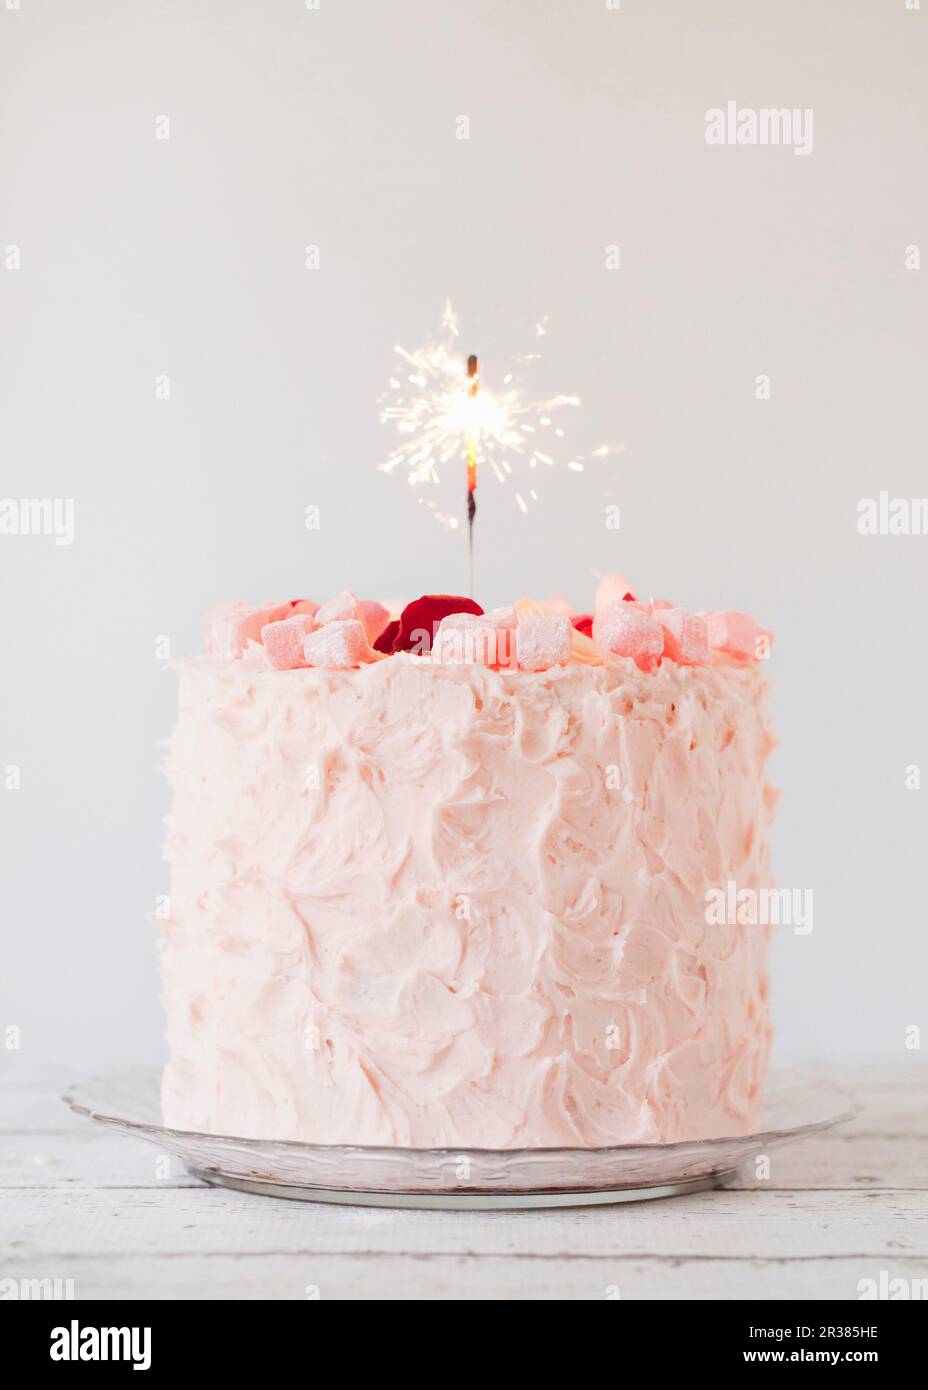 Turkish Delight layer cake with a sparkler candle Stock Photo - Alamy